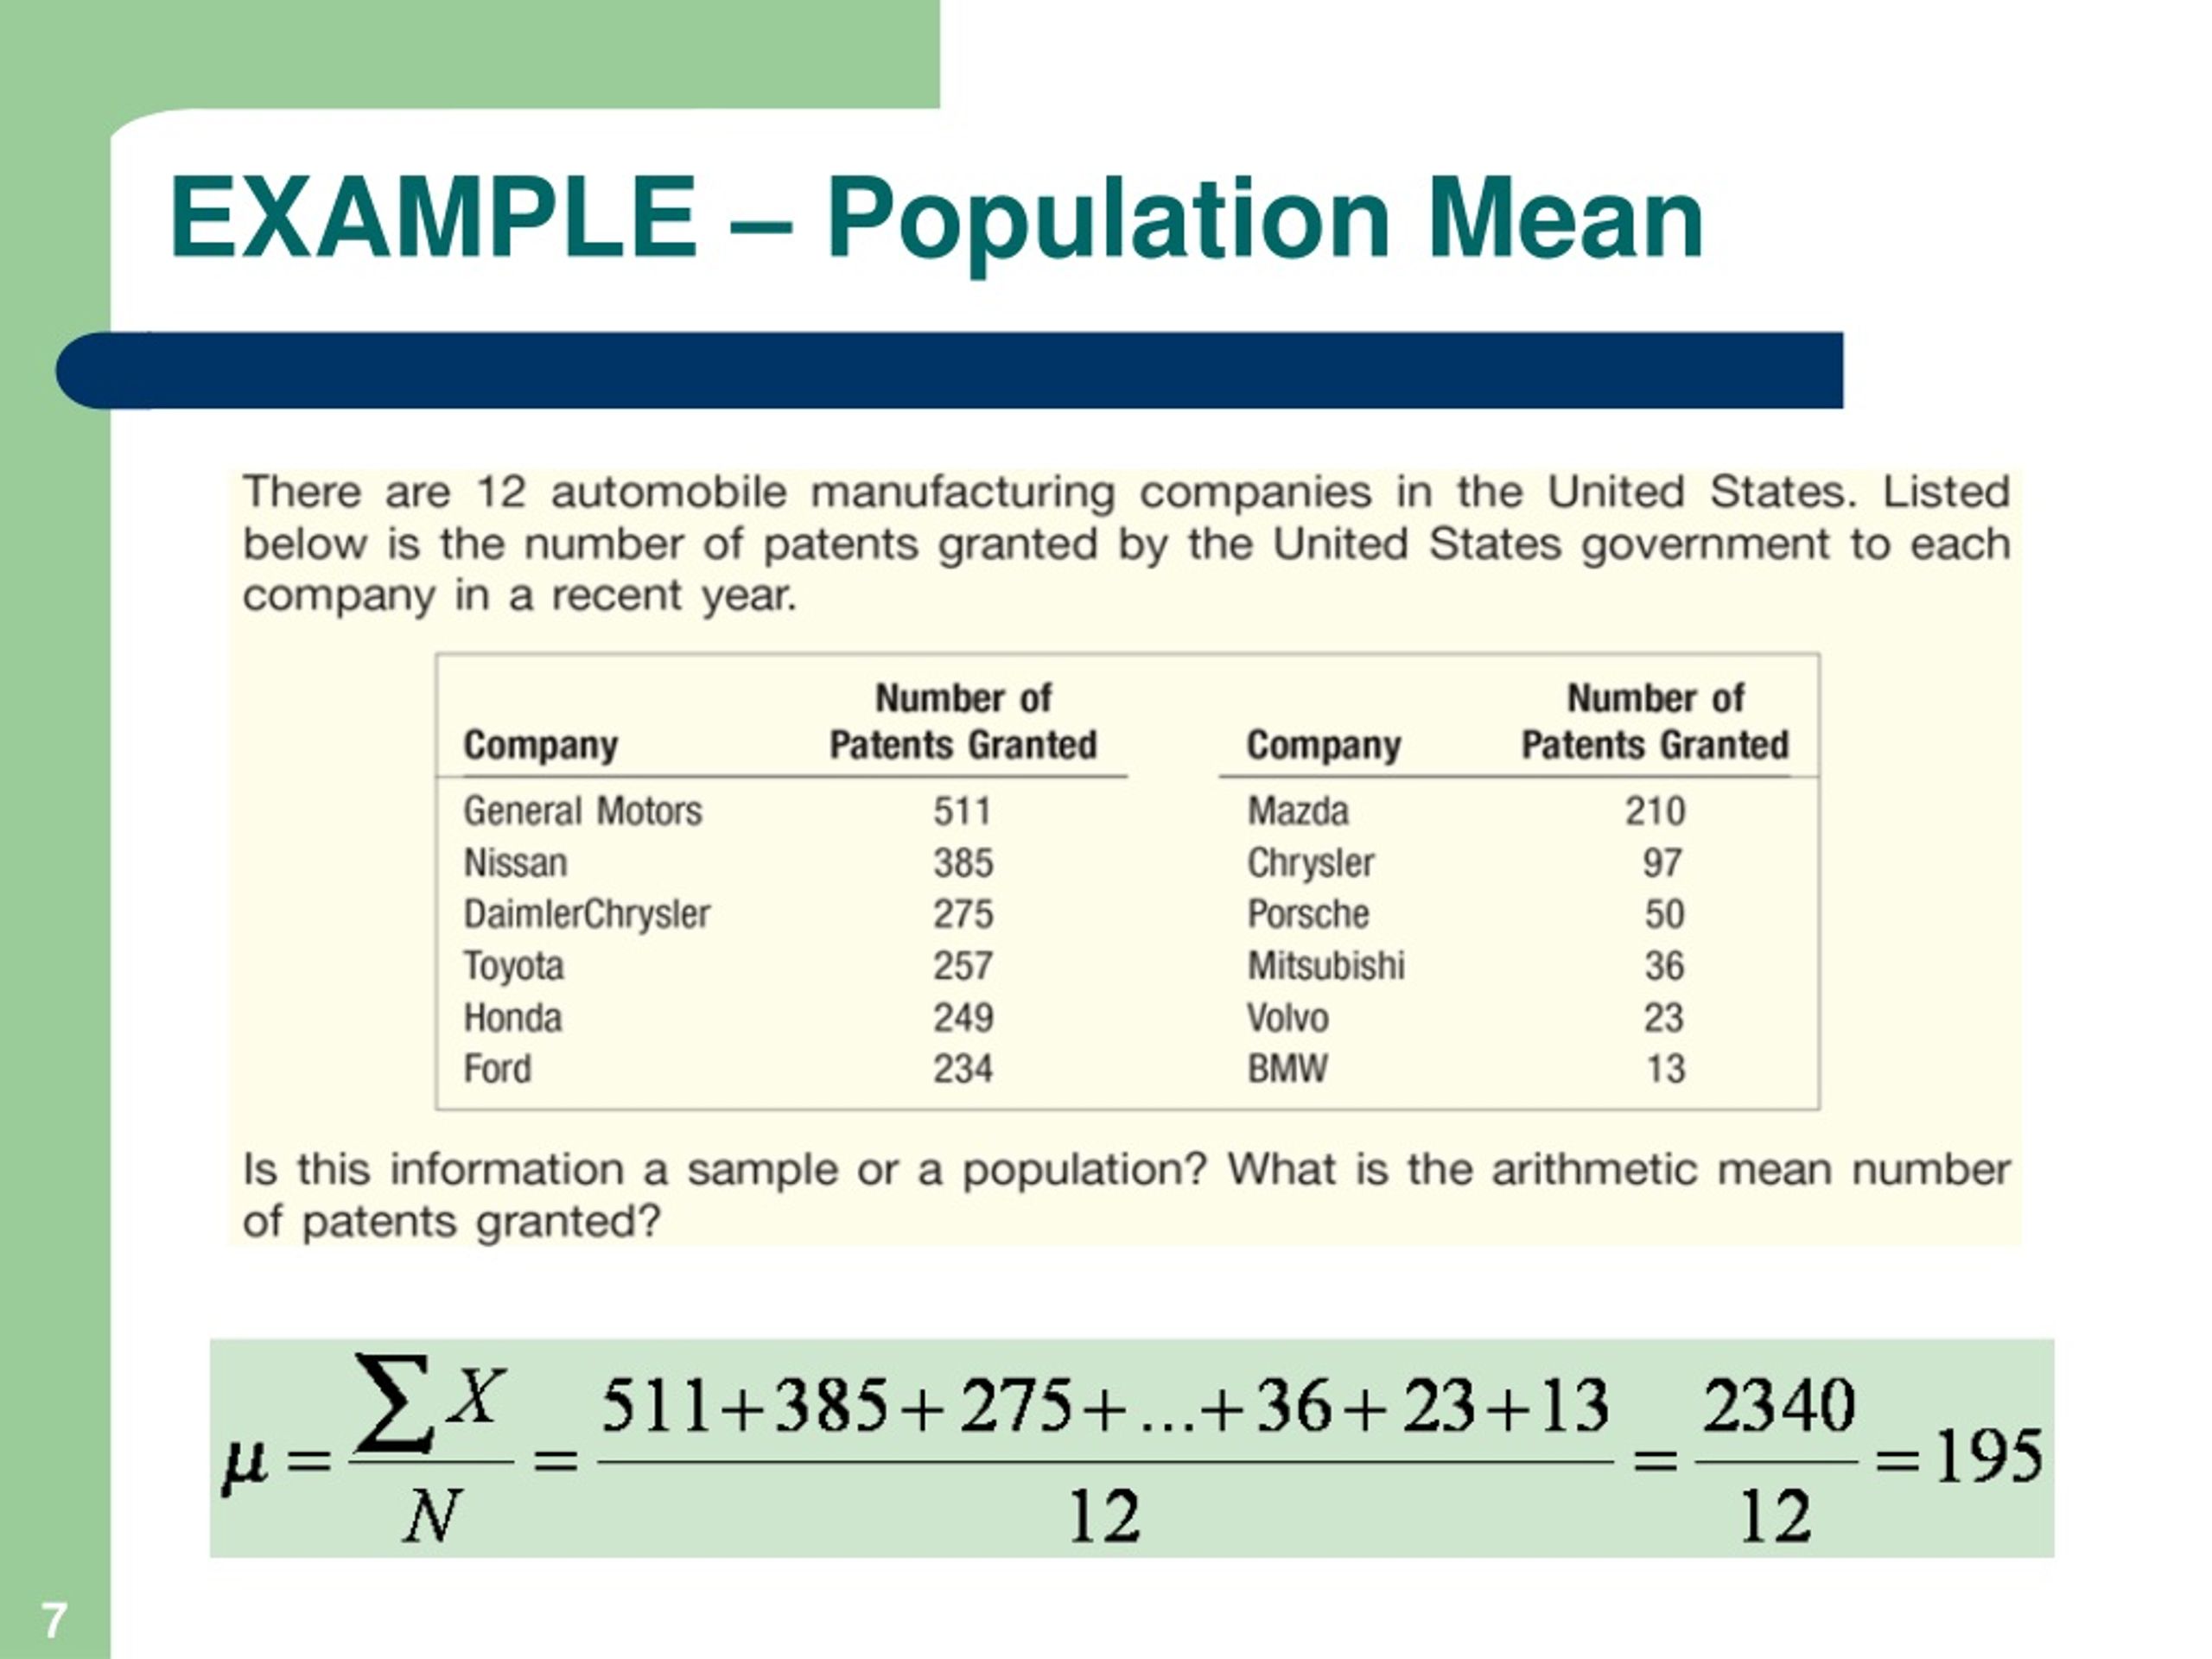 Sample meaning. How to calculate population mean. Sampling of populations. Numerical data example. Populate meaning.